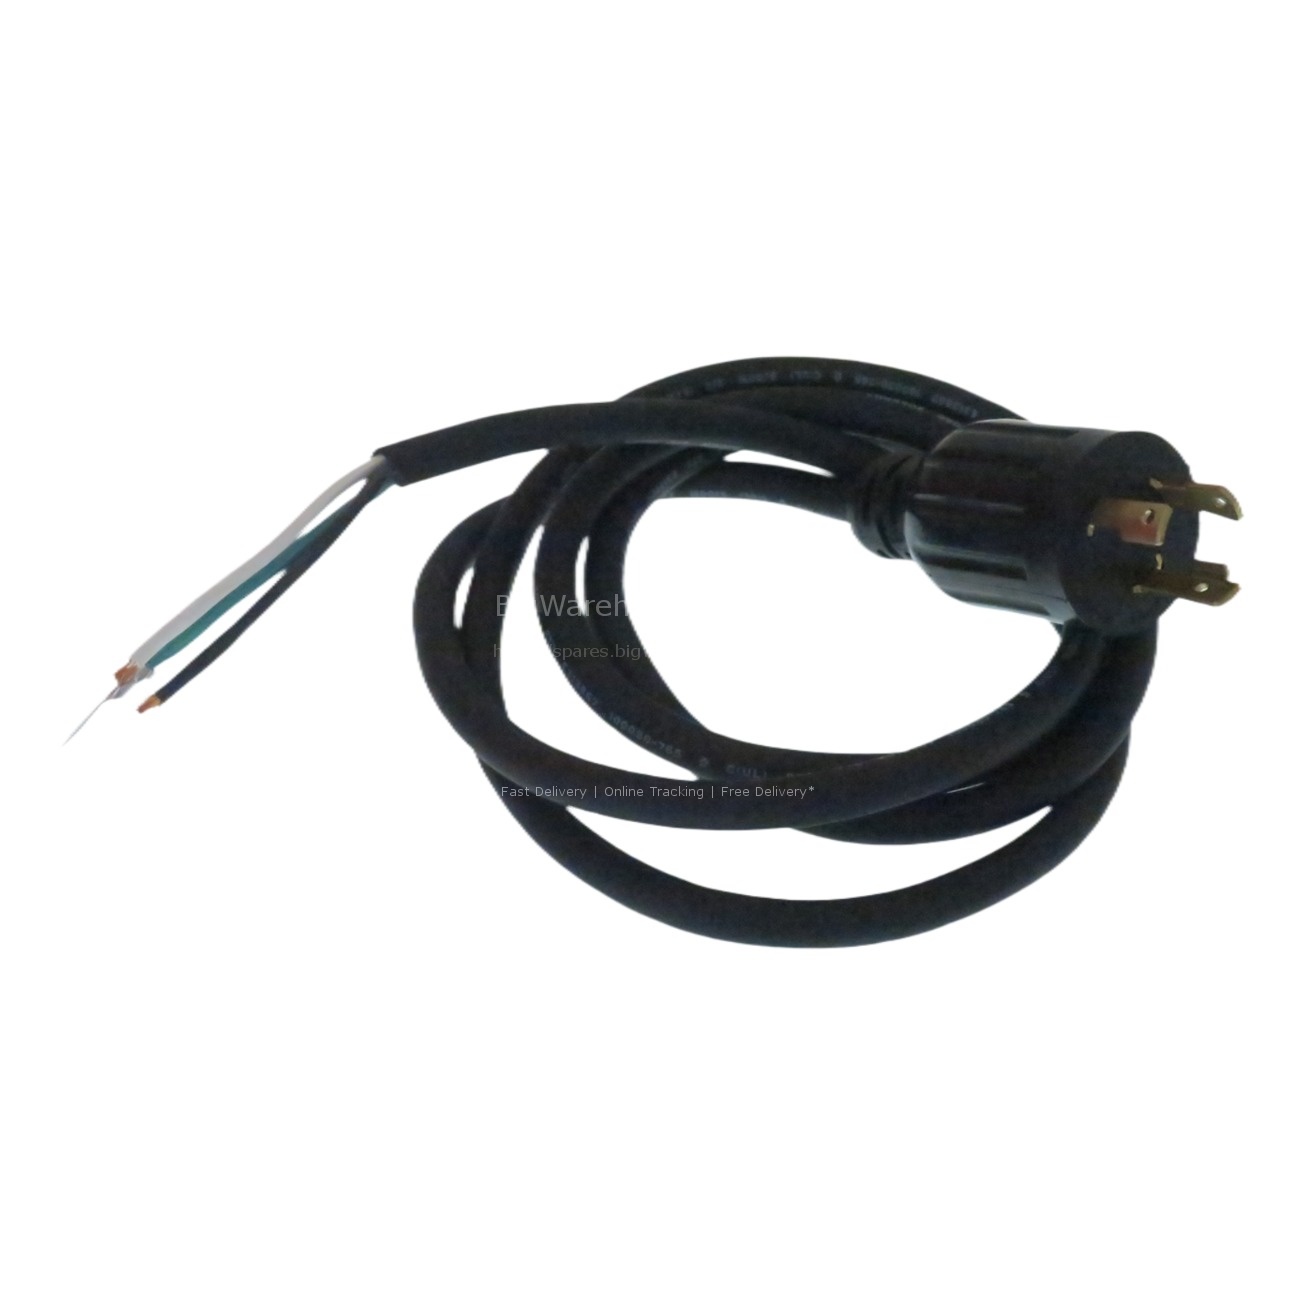 POWER SUPPLY CABLE AWG3x12 SJO 90 C